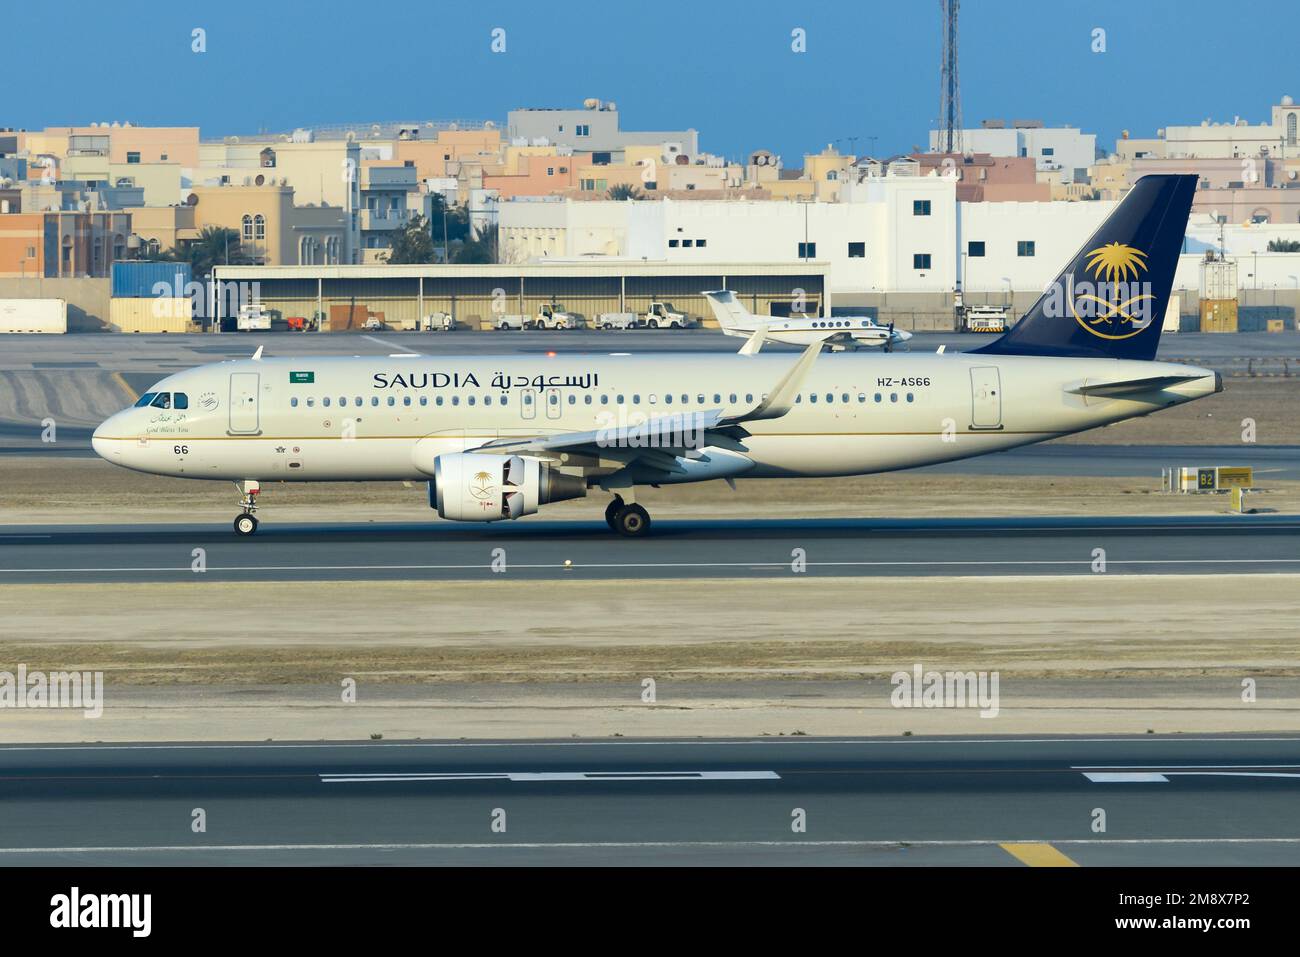 Saudia Airbus A320 airplane landing. Former Saudi Arabian Airlines airplane A320 with new Saudia Airlines name. Stock Photo